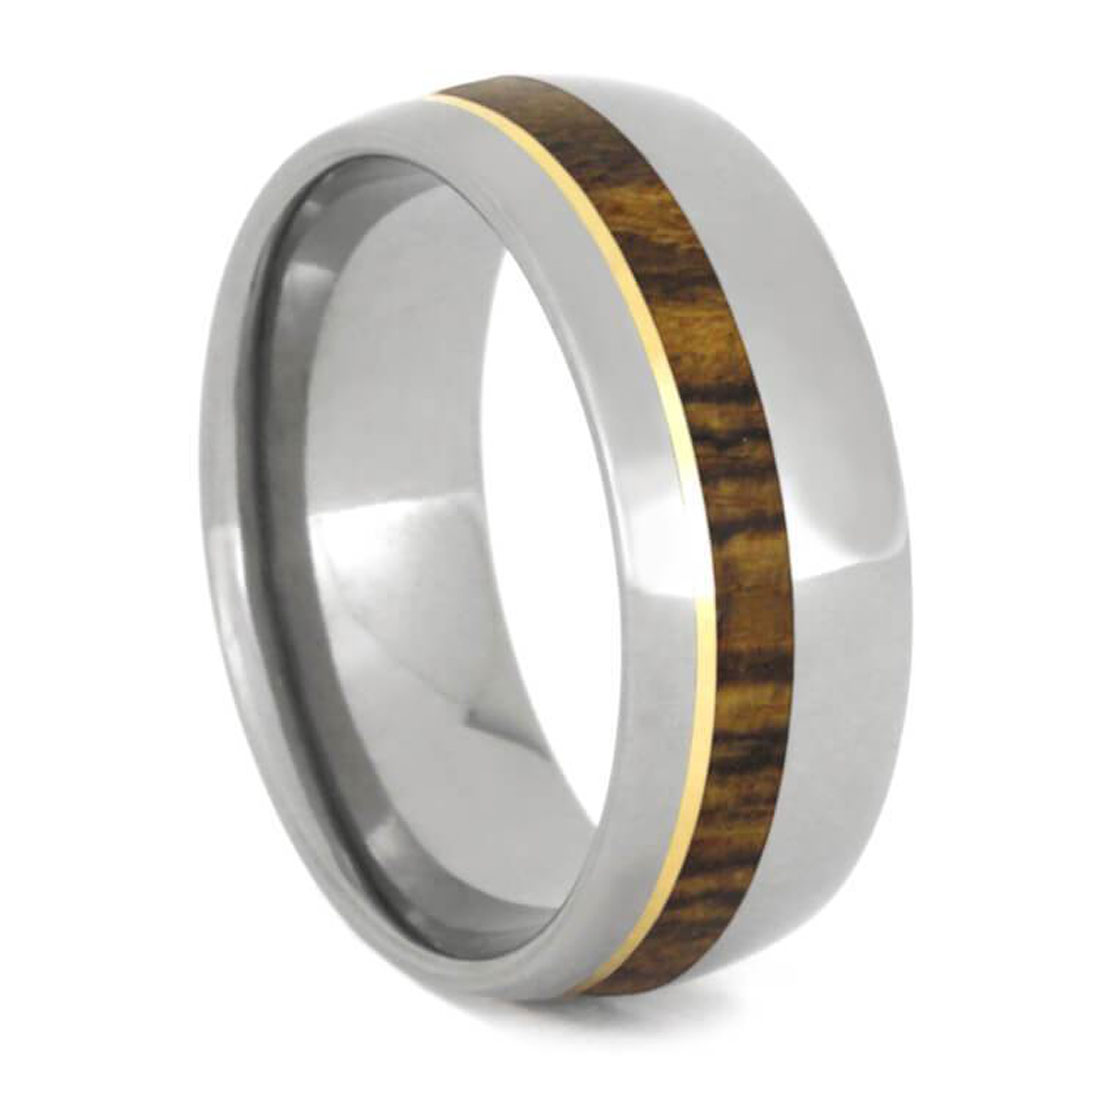 Hand made Bocote Wood with a 14k yellow gold pinstripe overlaid on an 8.00 millimeter, comfort-fit, polished titanium band. 